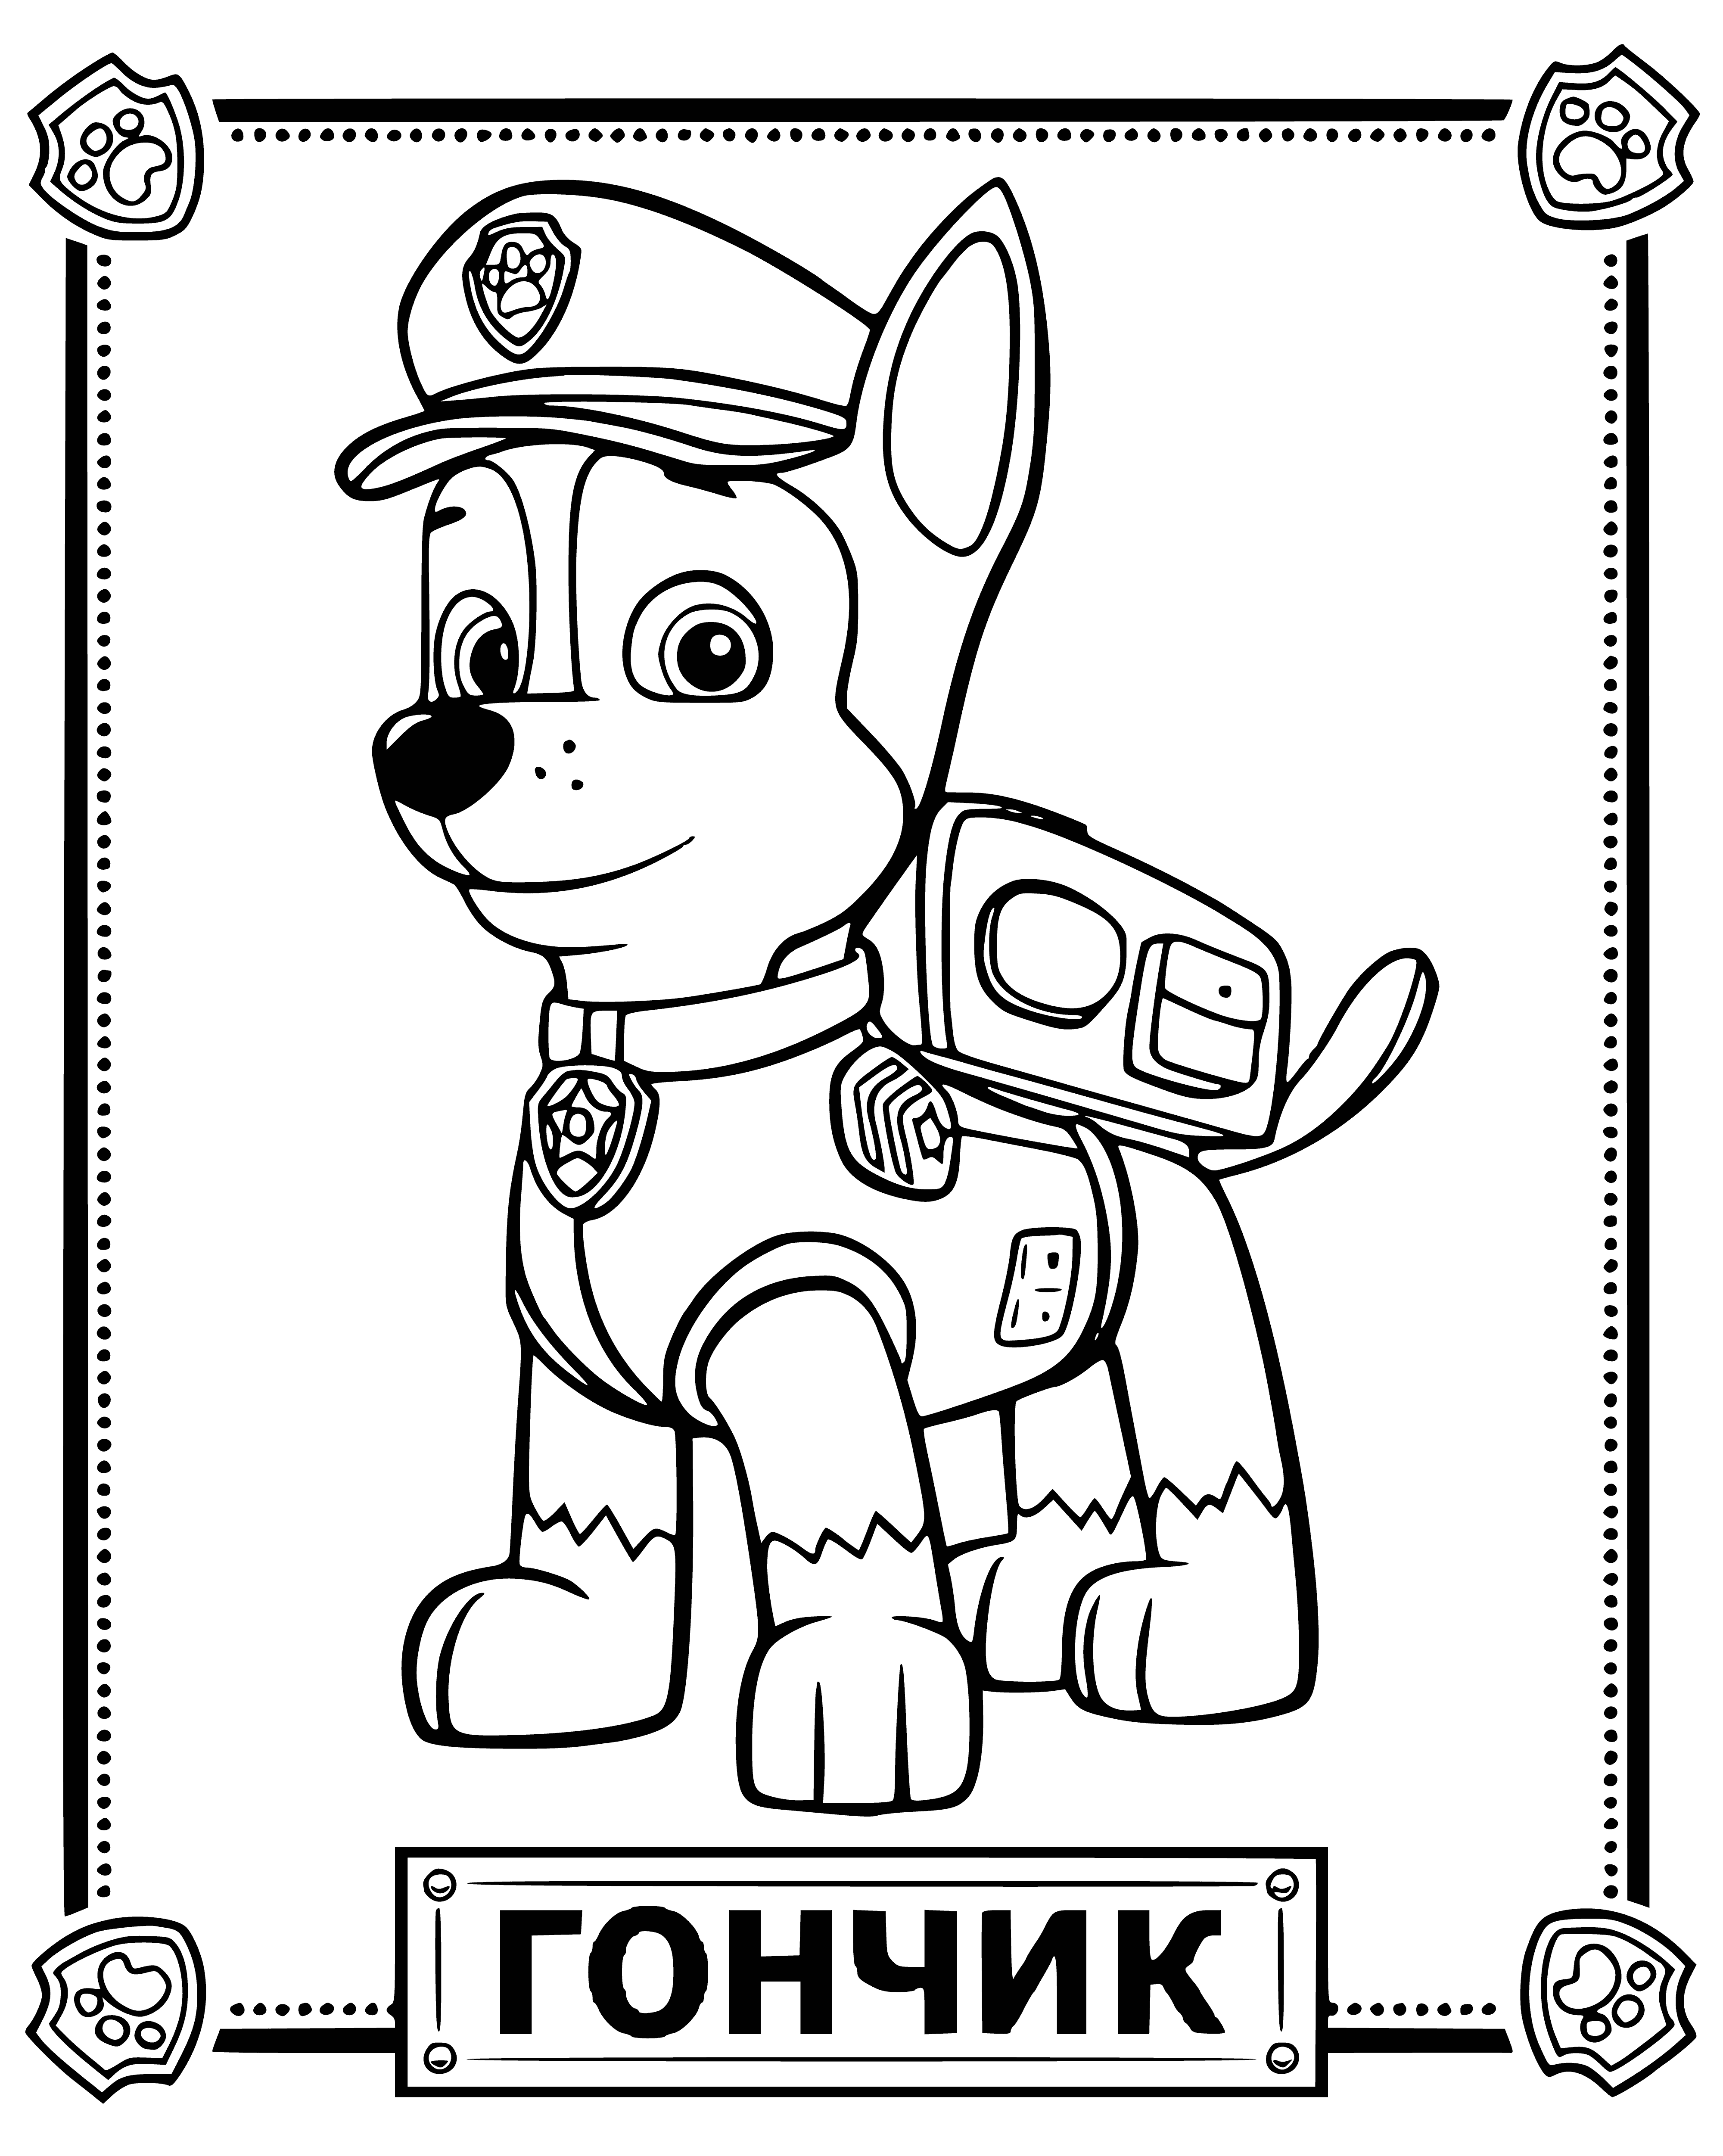 Racer coloring page